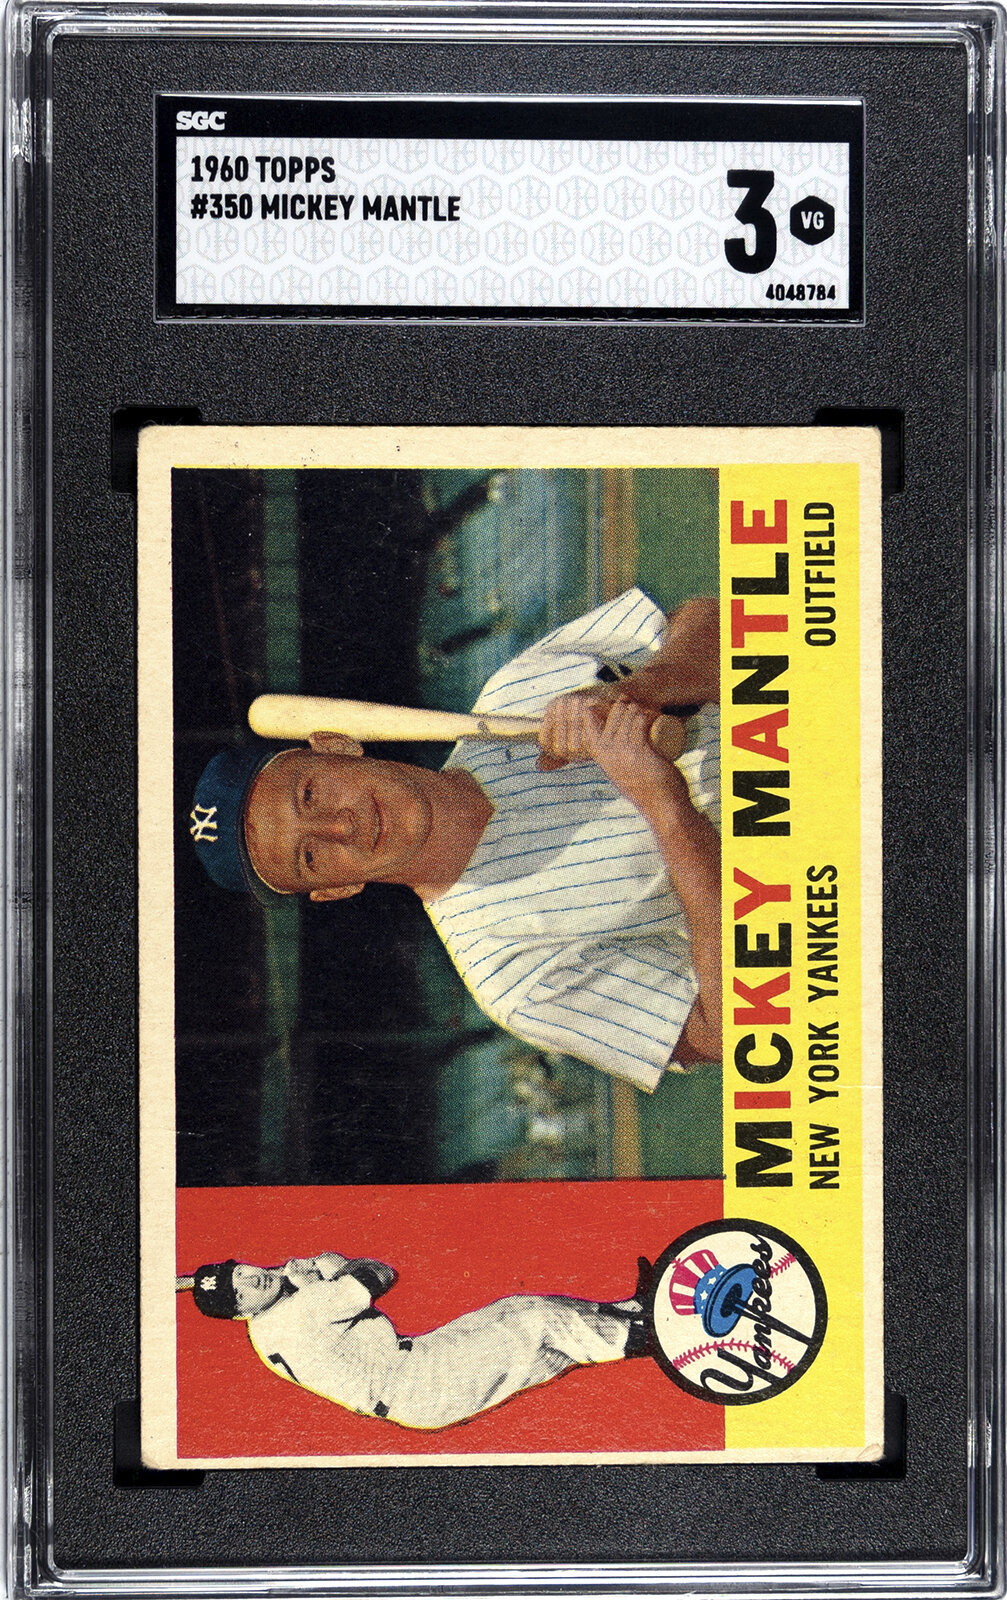 1960 TOPPS MICKEY MANTLE SGC 3